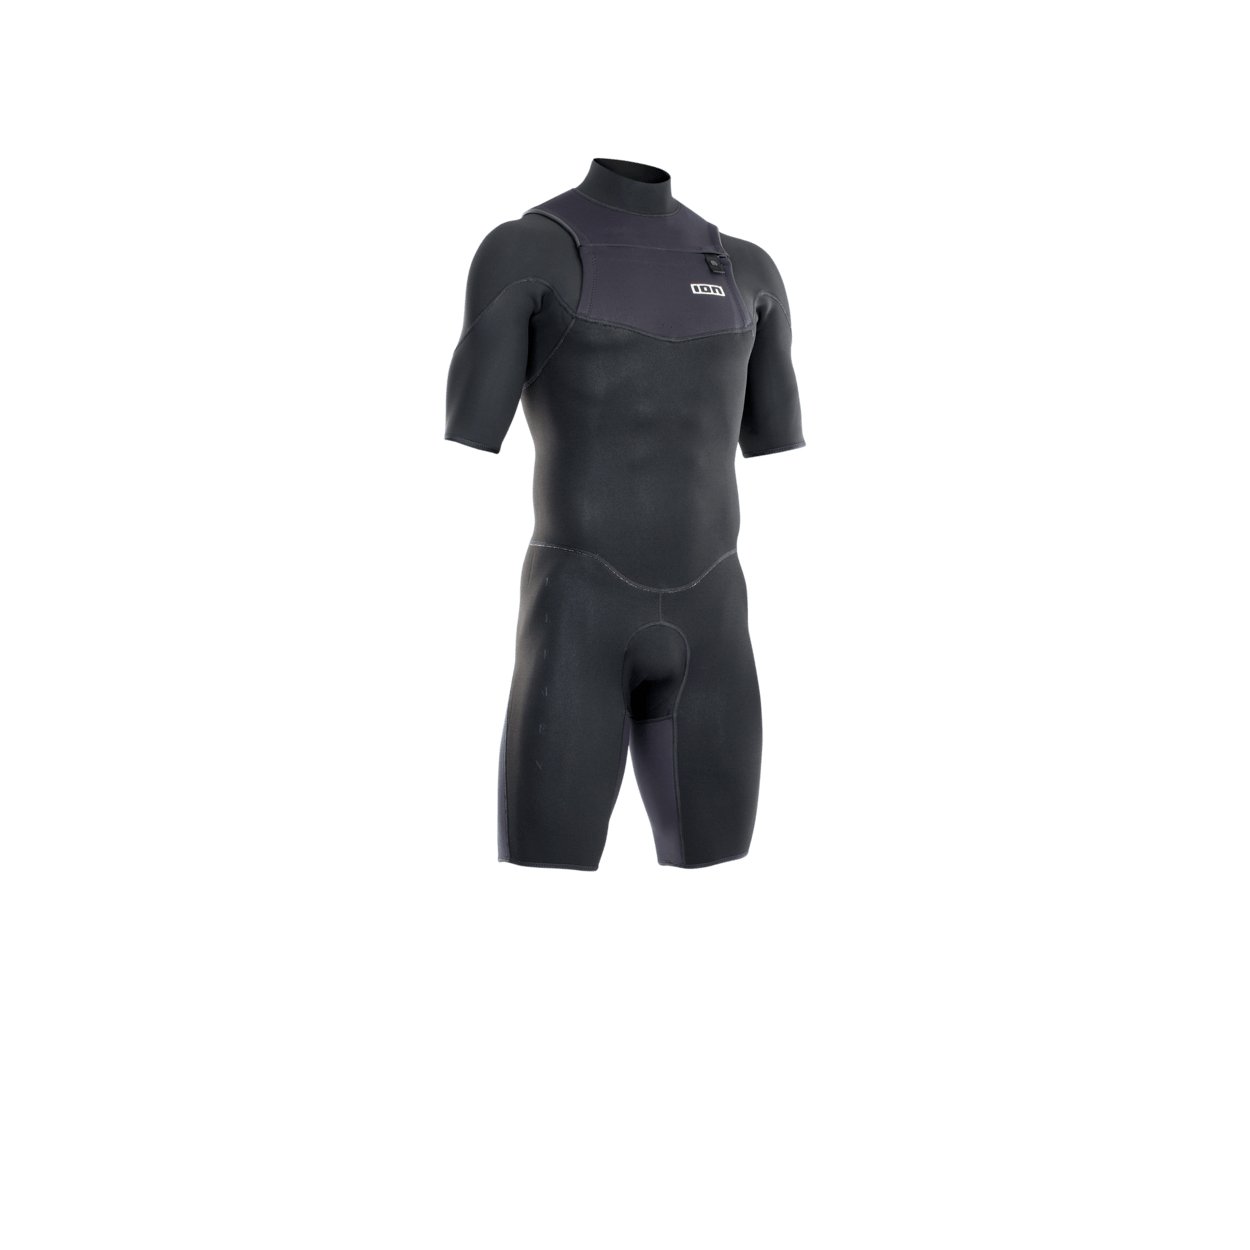 ION Men Wetsuit Element 2/2 Shorty Shortsleeve Front Zip 2022 - Worthing Watersports - 9008415951192 - Wetsuits - ION Water